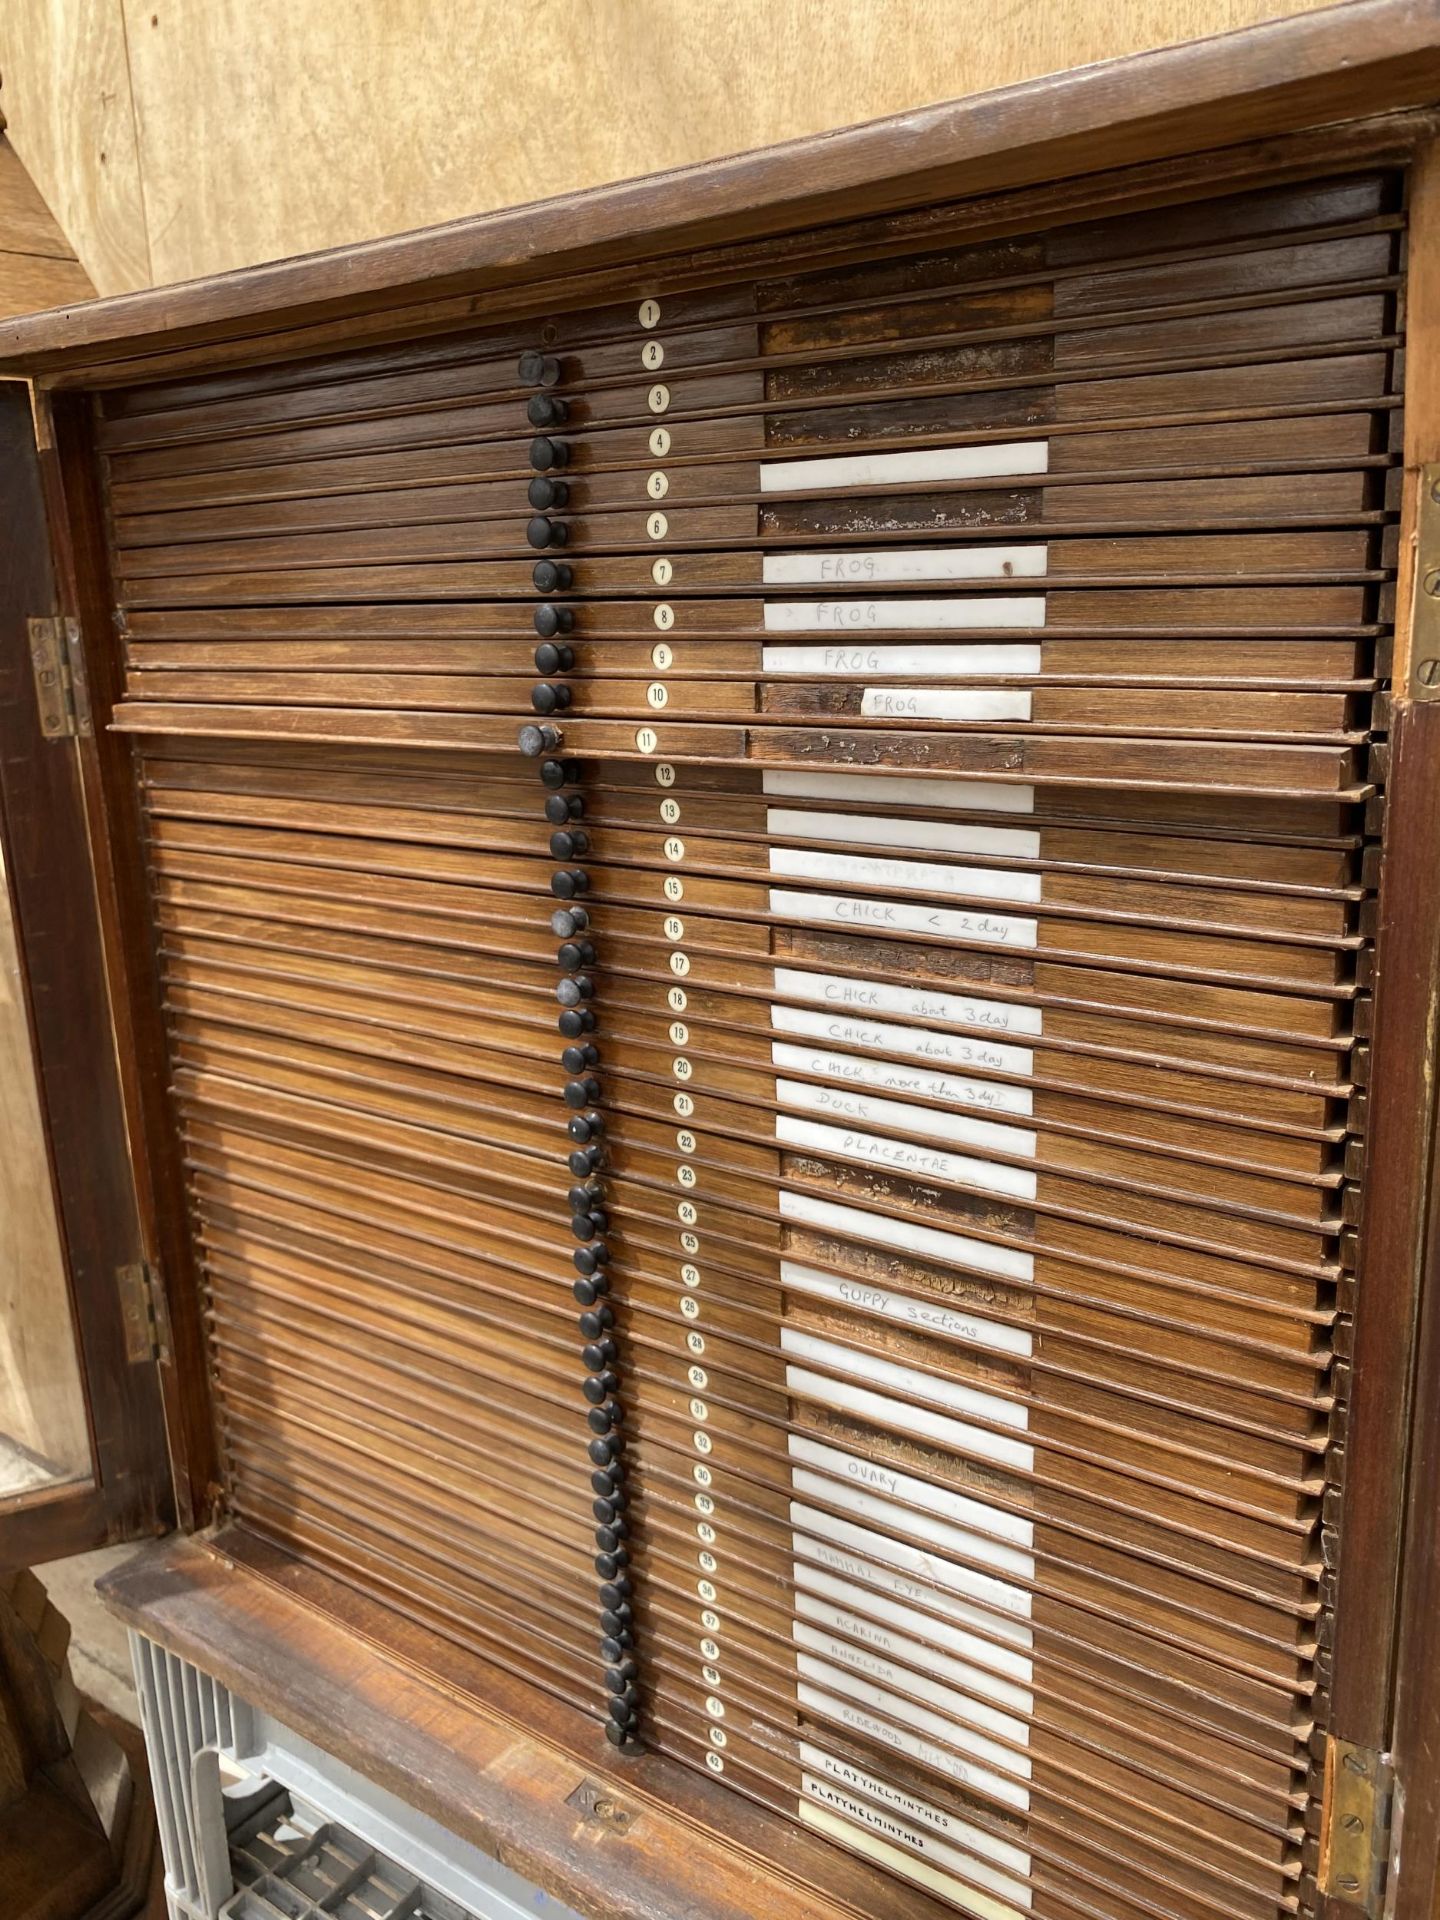 A VINTAGE OAK ENTOMOLOGY CABINET WITH 42 DRAWERS AND GLASS DOORS - Image 3 of 8